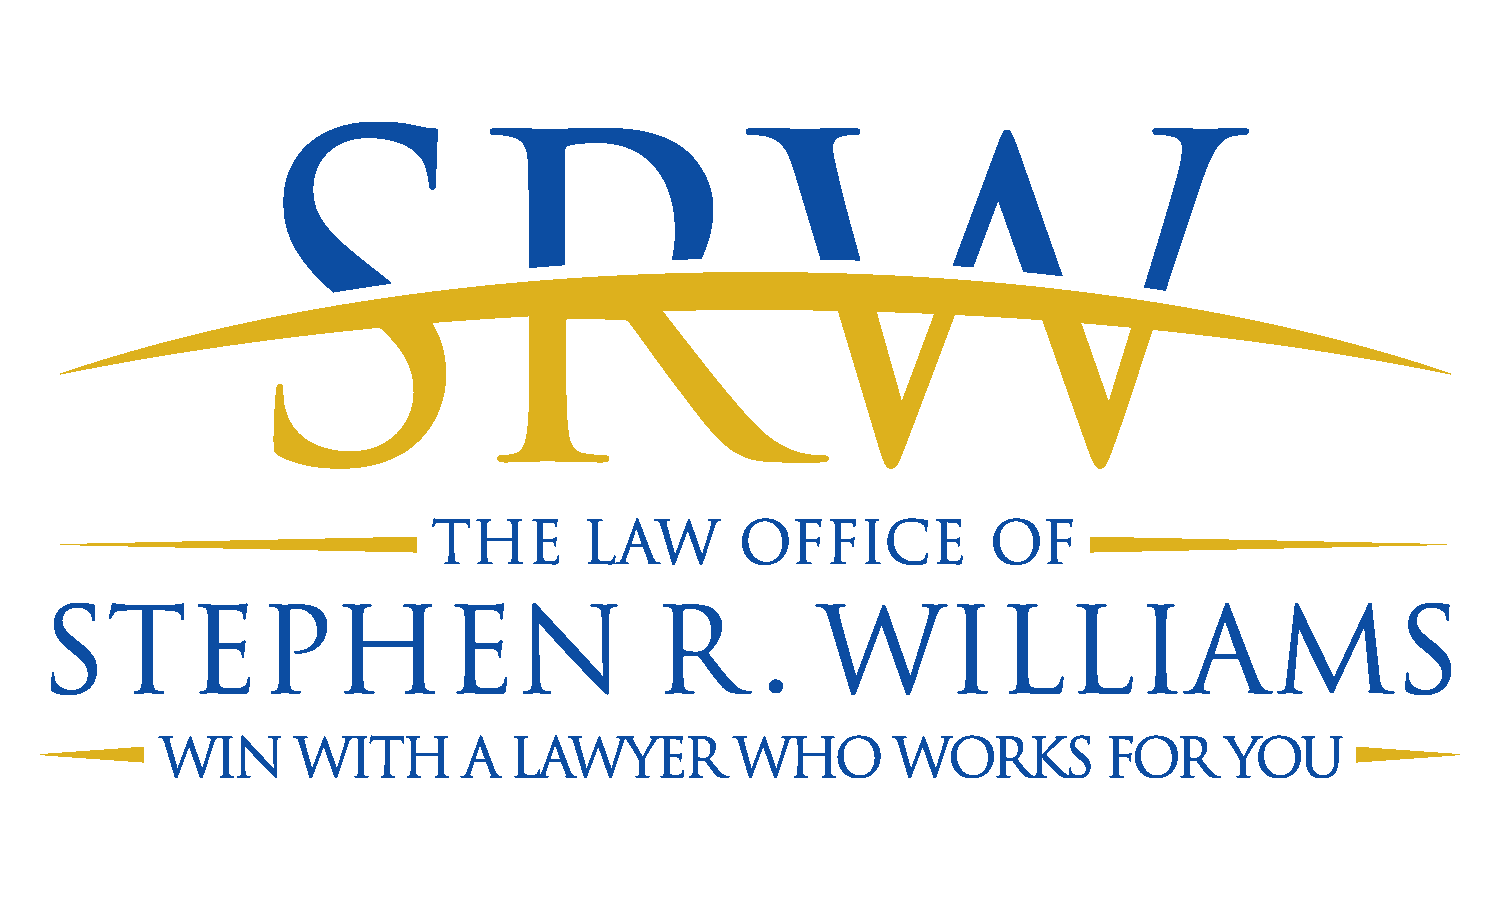 The Law Office of Stephen R. Williams